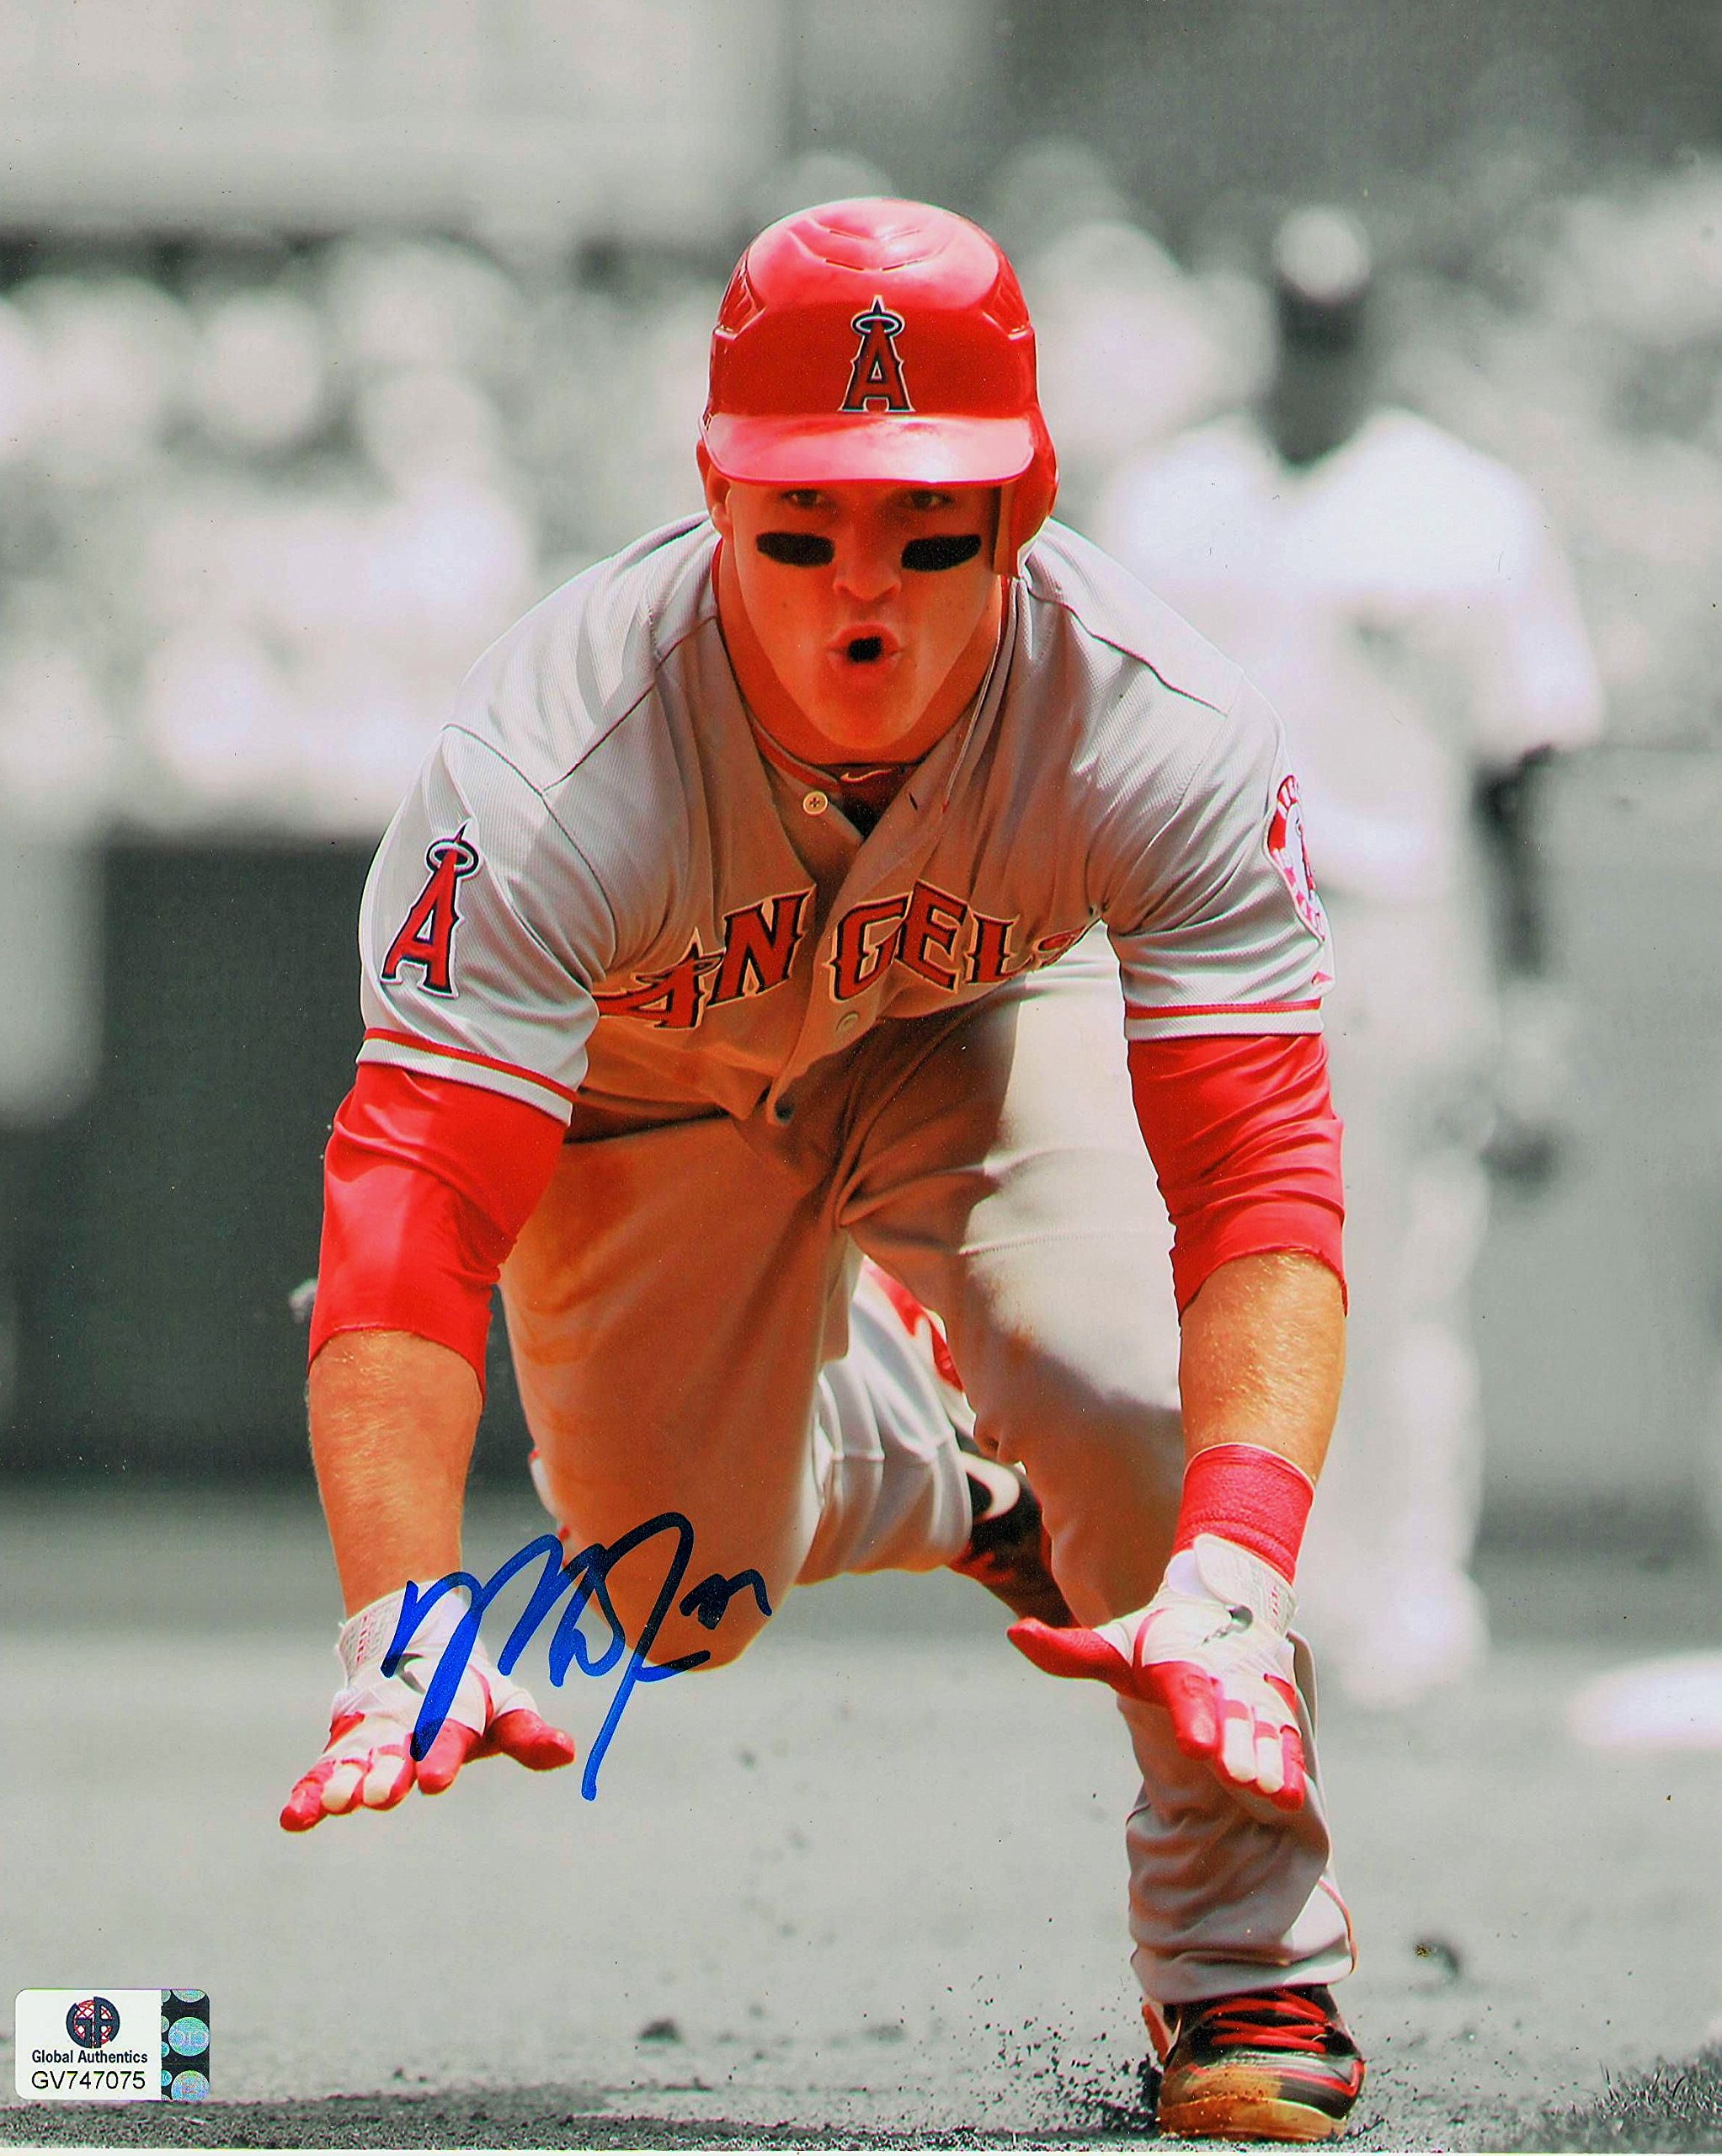 Kirkland Mike Trout, 8 by 10 Autograph Photo on Glossy Photo Paper